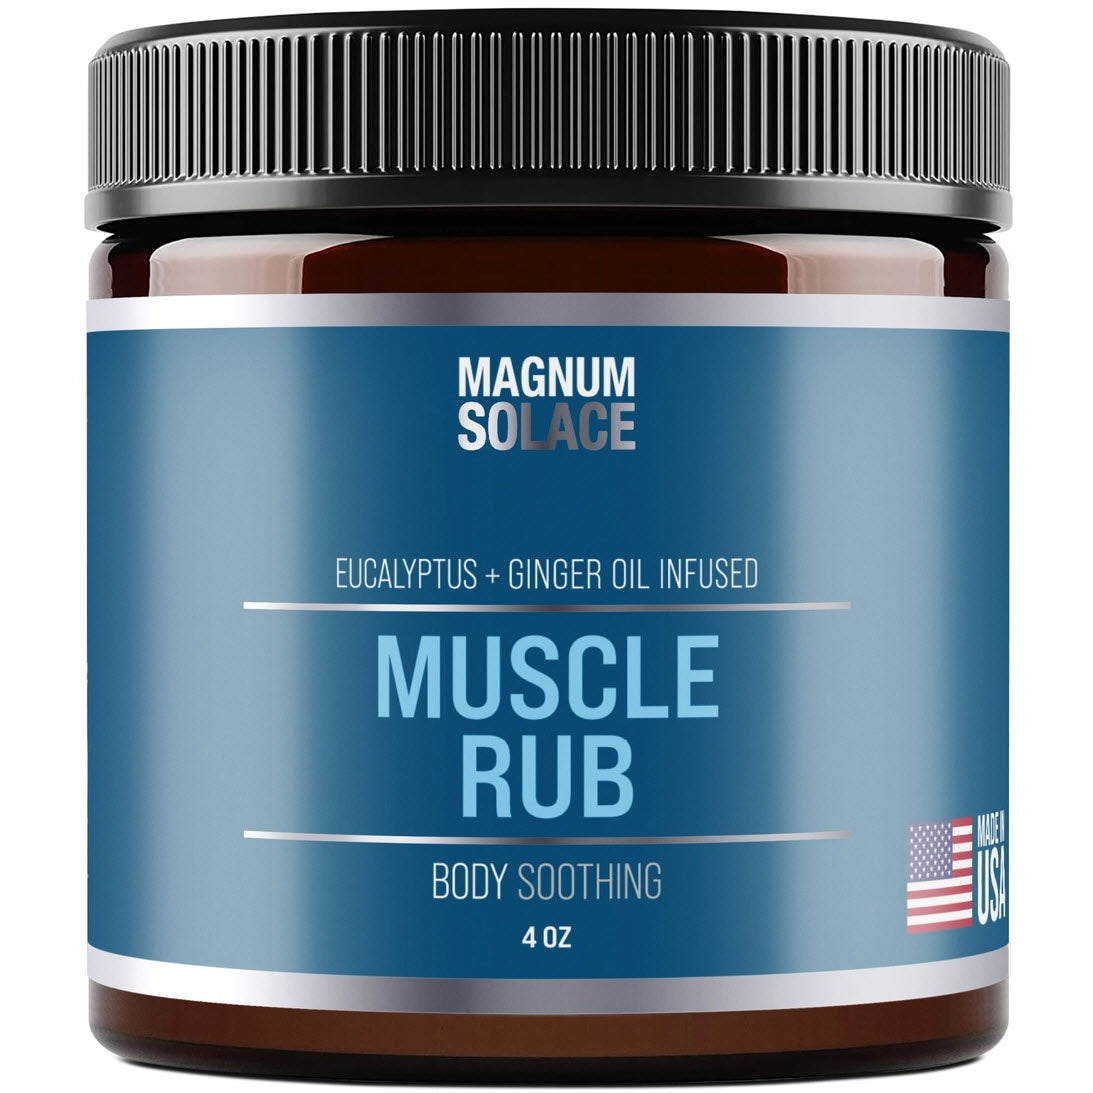 Body Soothing Muscle Rub